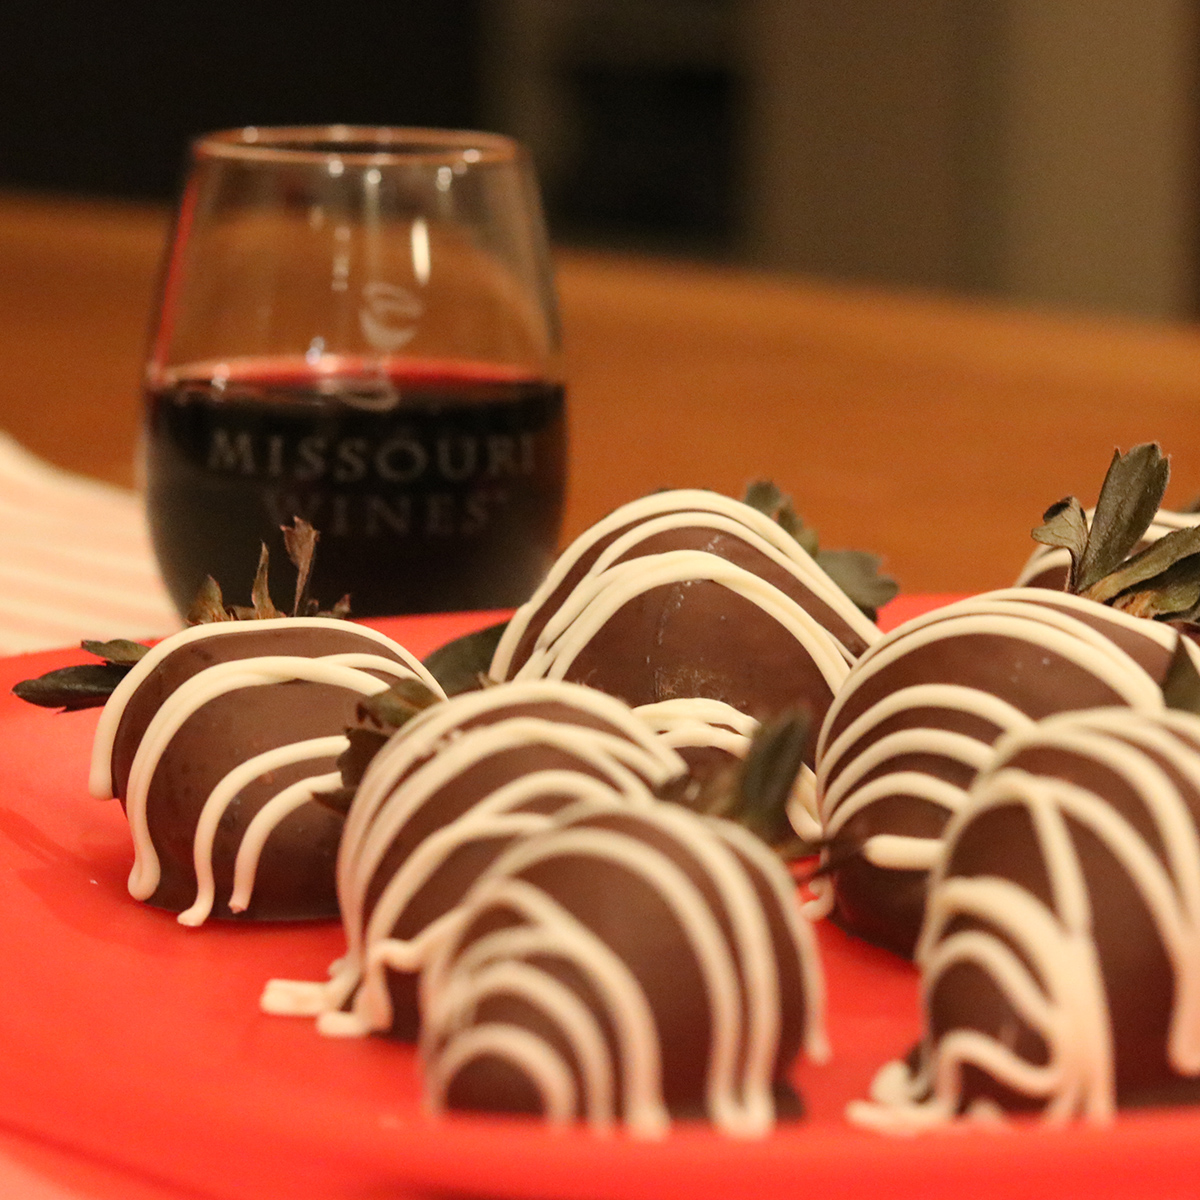 Wine Infused Chocolate Covered Strawberries from MissouriWine.org